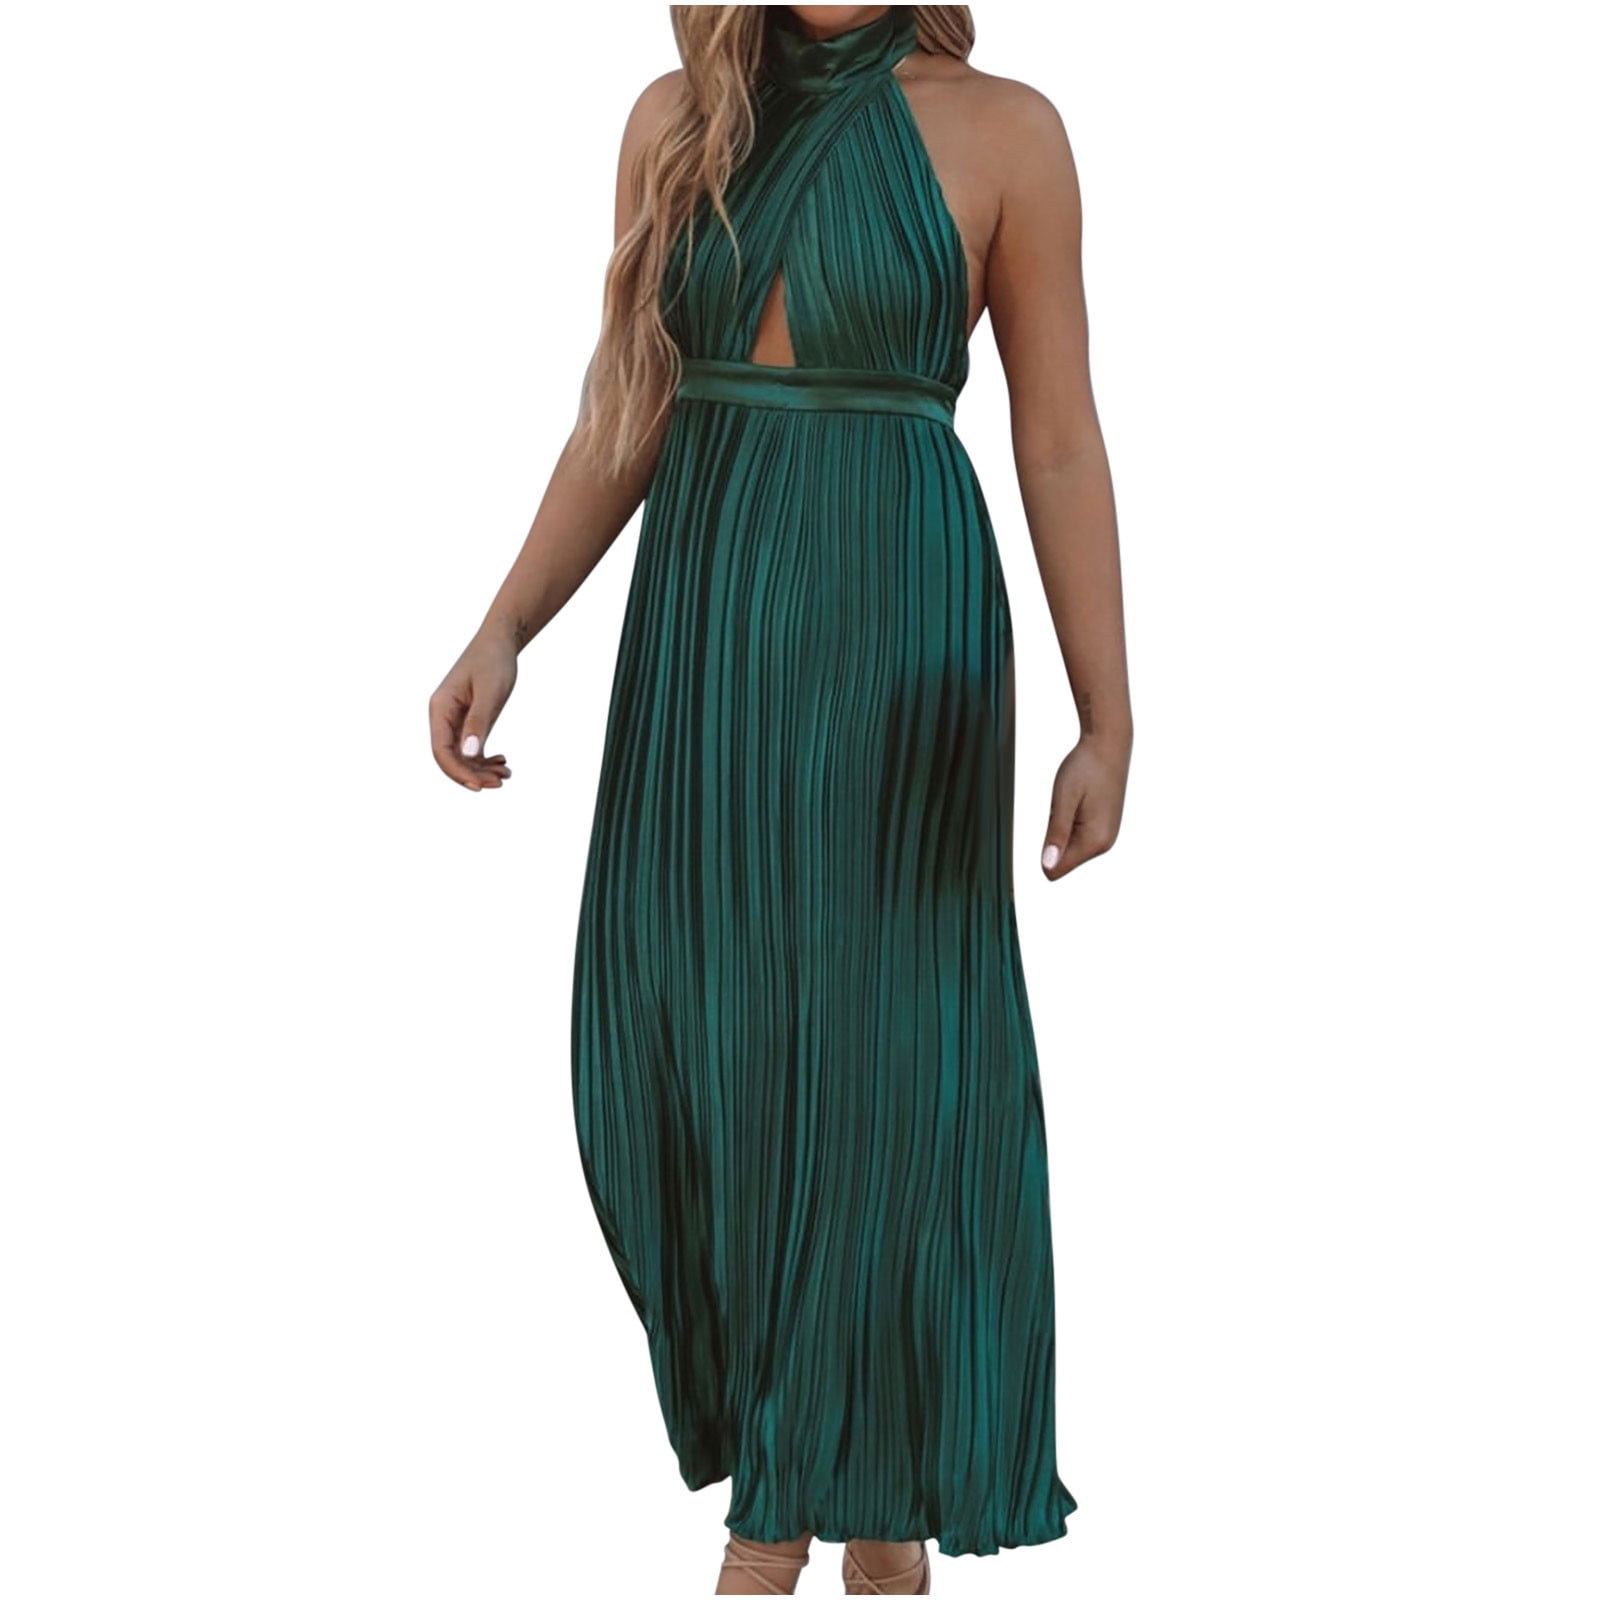 Wycnly Formal Dresses for Women Sleeveless Halter Striped Print Summer Maxi  Dresses Flowy Pleated Swing Off Shoulder Backless Party Dress Green M -  Walmart.com